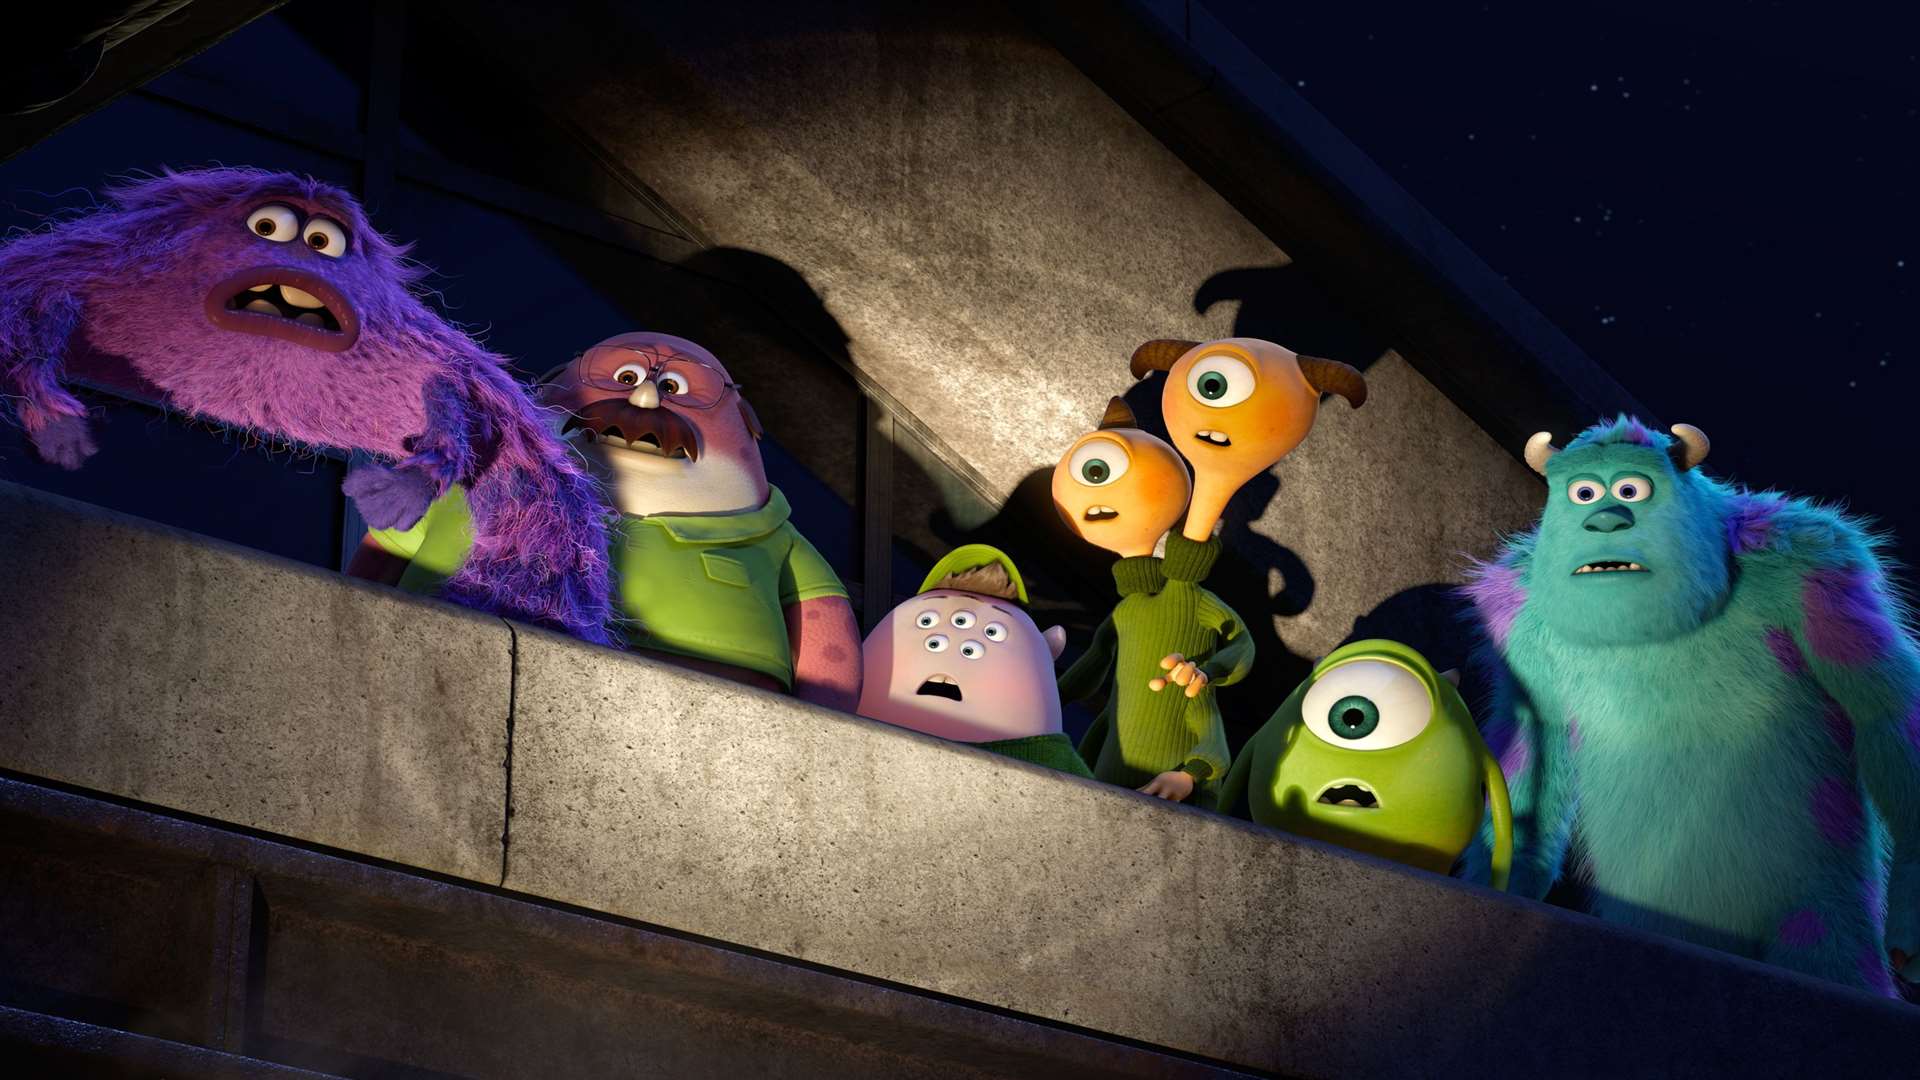 Monsters University with Mike (voiced by Billy Cyrstal) and Sulley (voiced by John Goodman), among other monsters. Picture: PA Photo/Disney Pixar.